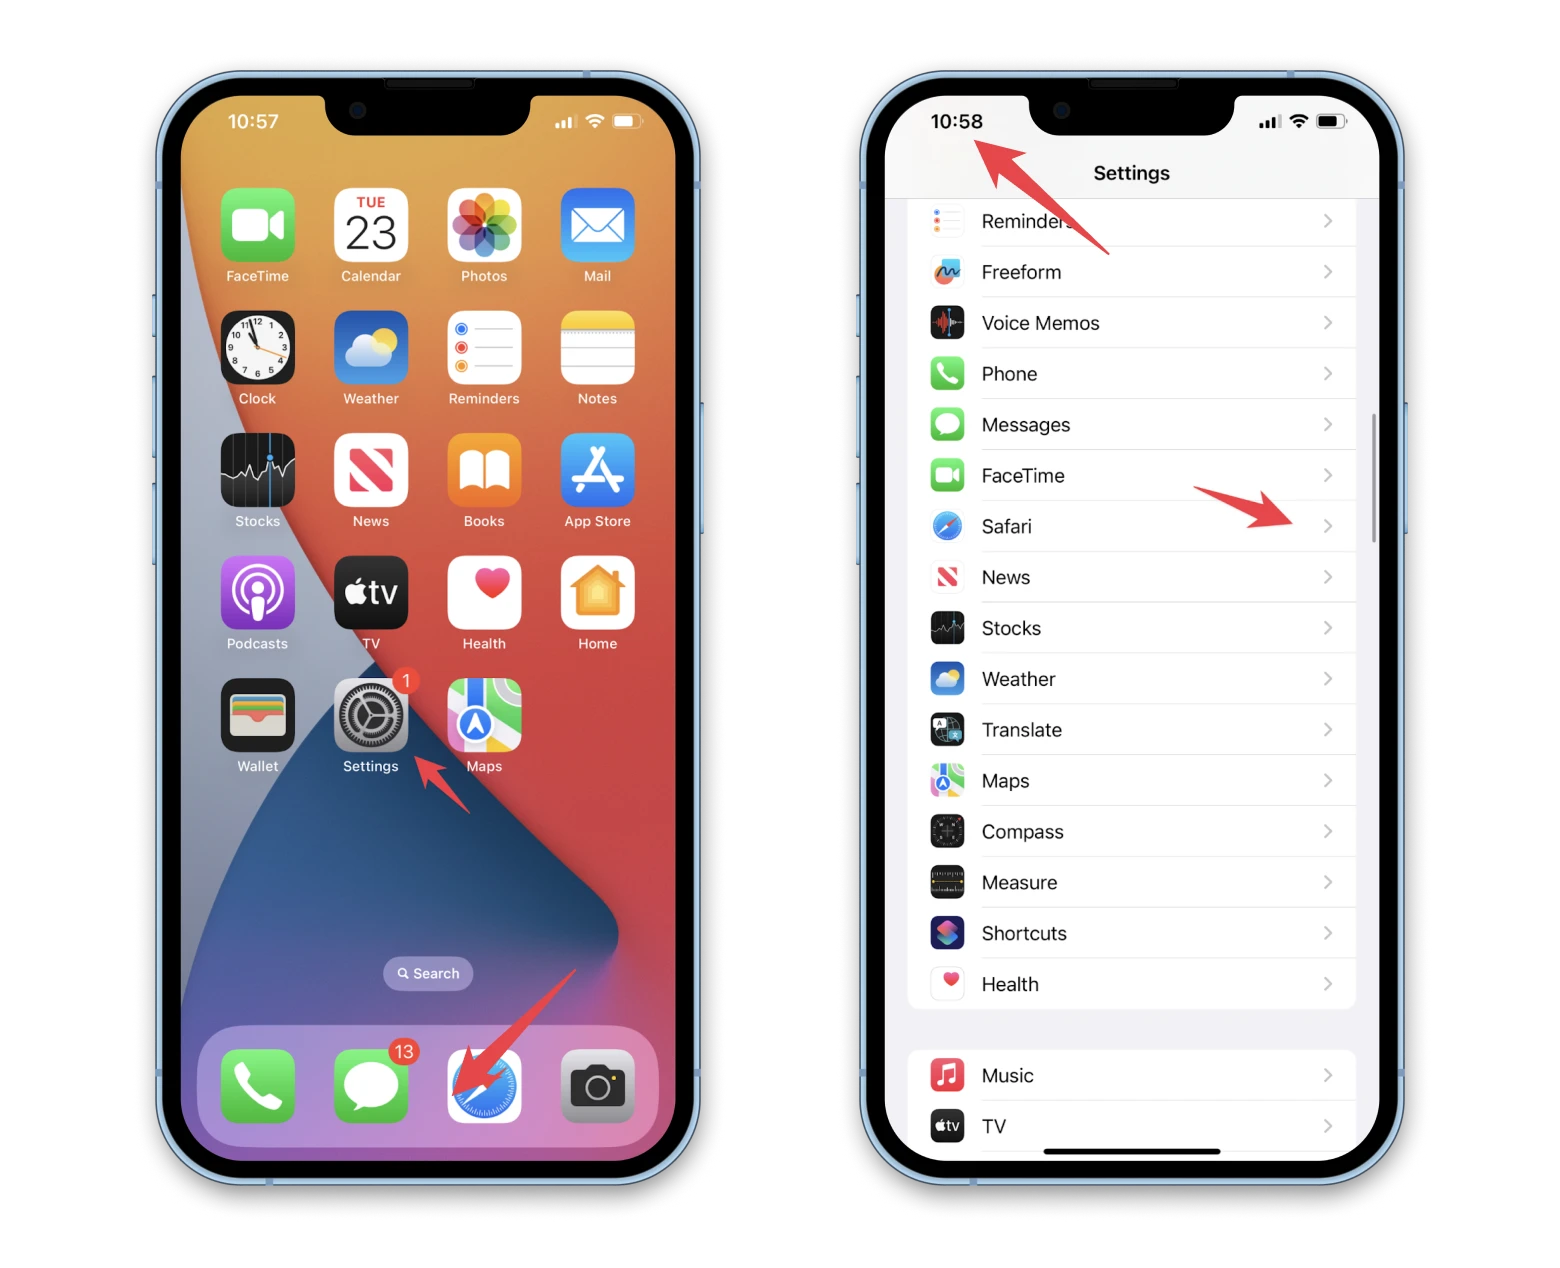 How To Clear Cache On Iphone And Ipad: Complete Instructions